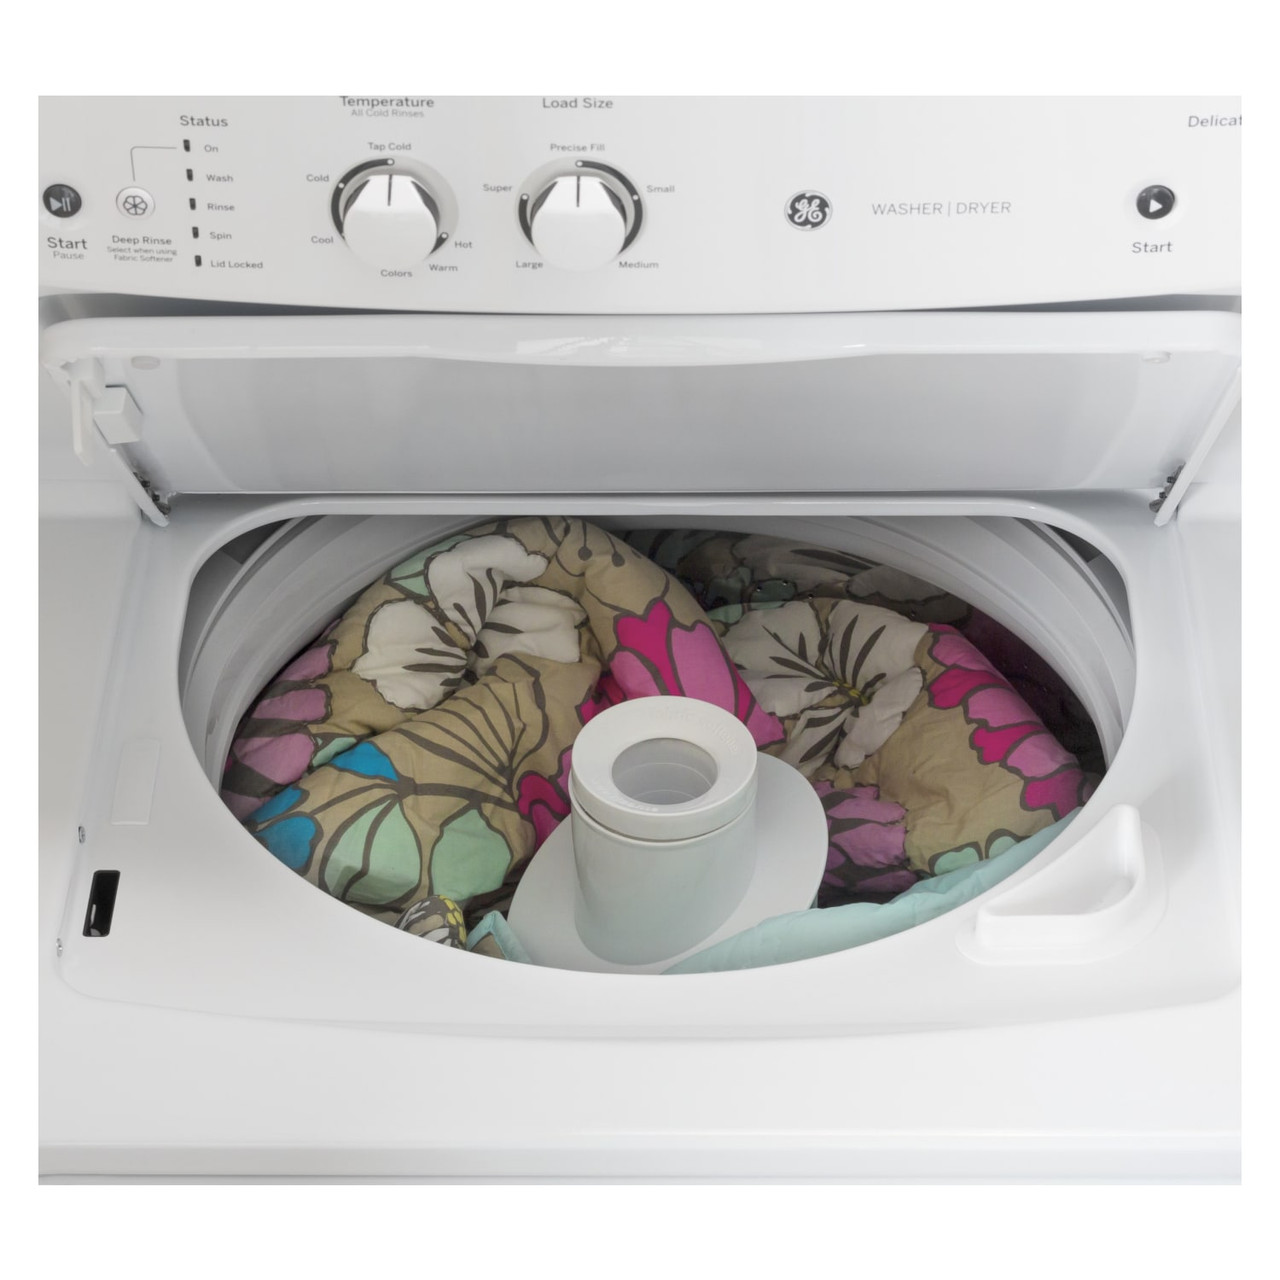 GE - 3.8 Cu. Ft. Top Load Washer and 5.9 Cu. Ft. Electric Dryer Laundry Center - White - GUD27ESSMWW